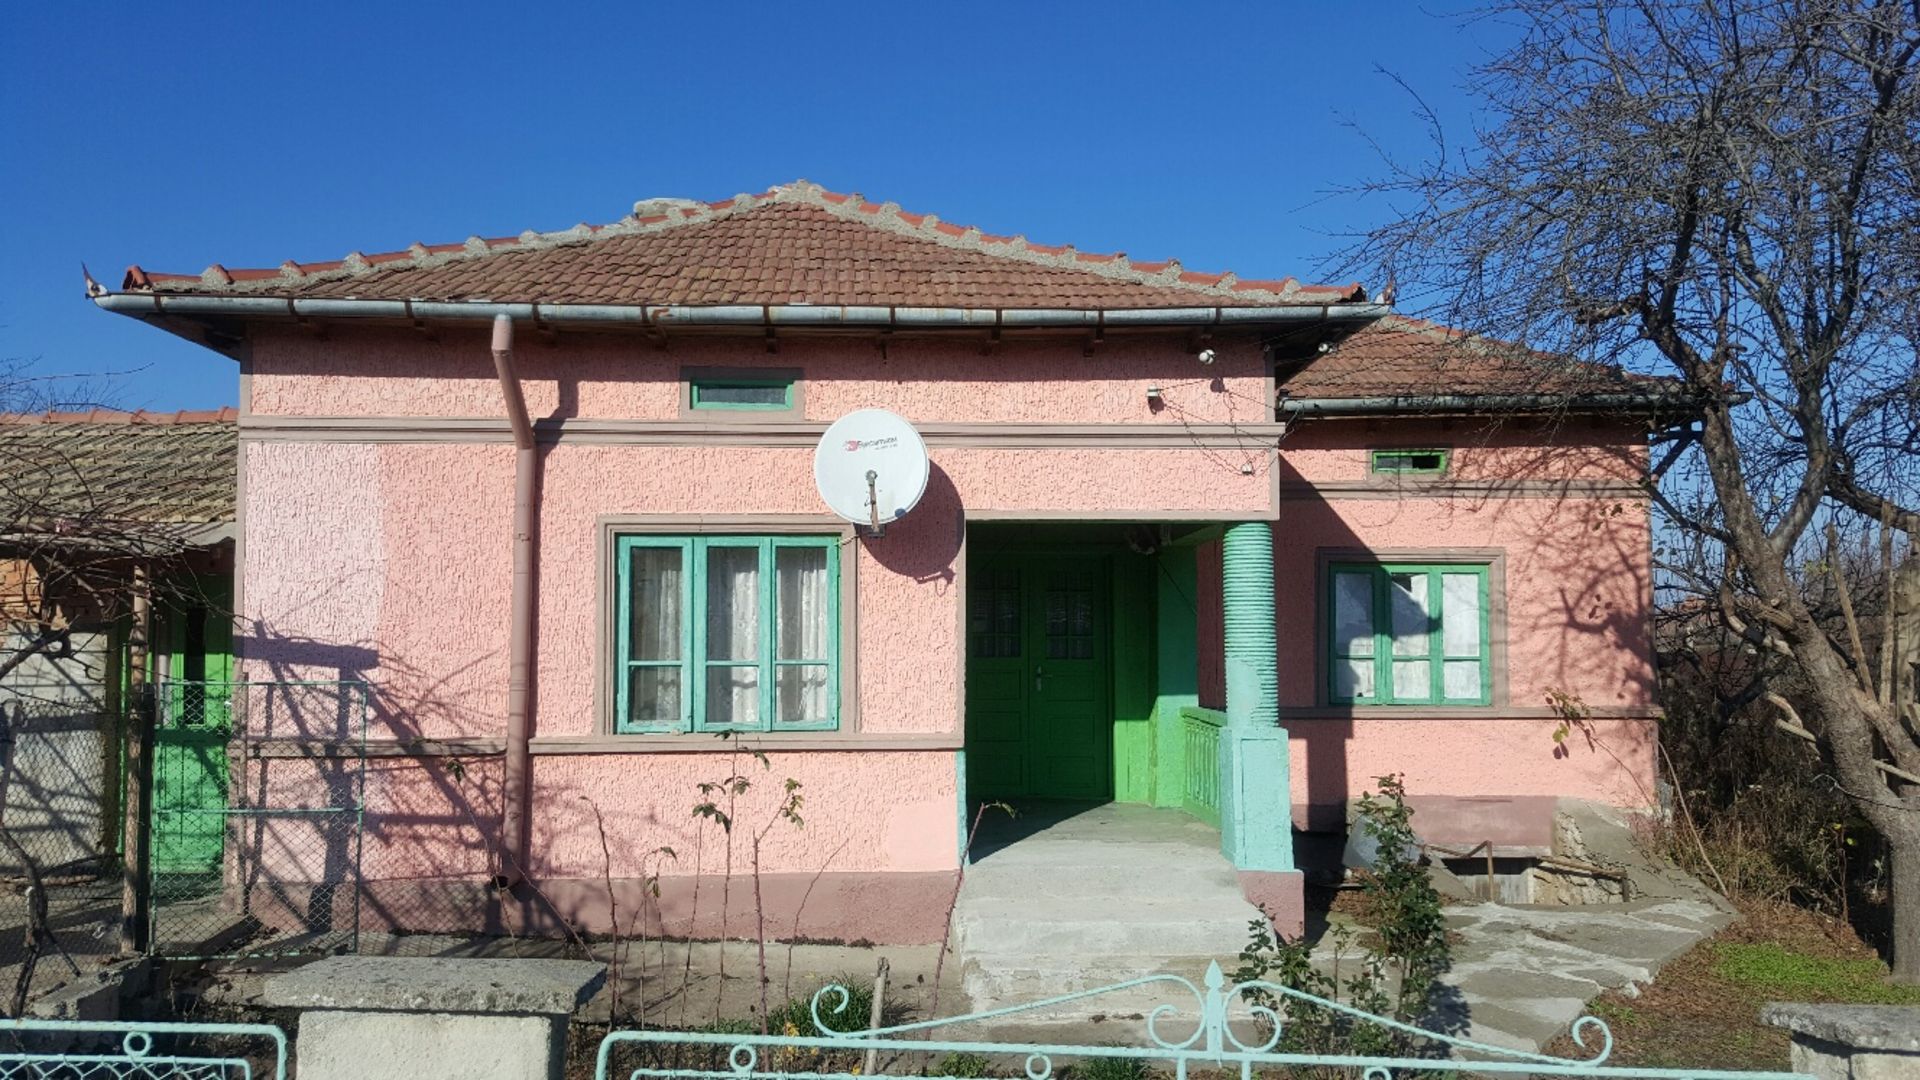 7 ROOM BULGARIAN COTTAGE IN IZVOROVO FOR SALE. WITH LAND NOT FAR FROM COAST